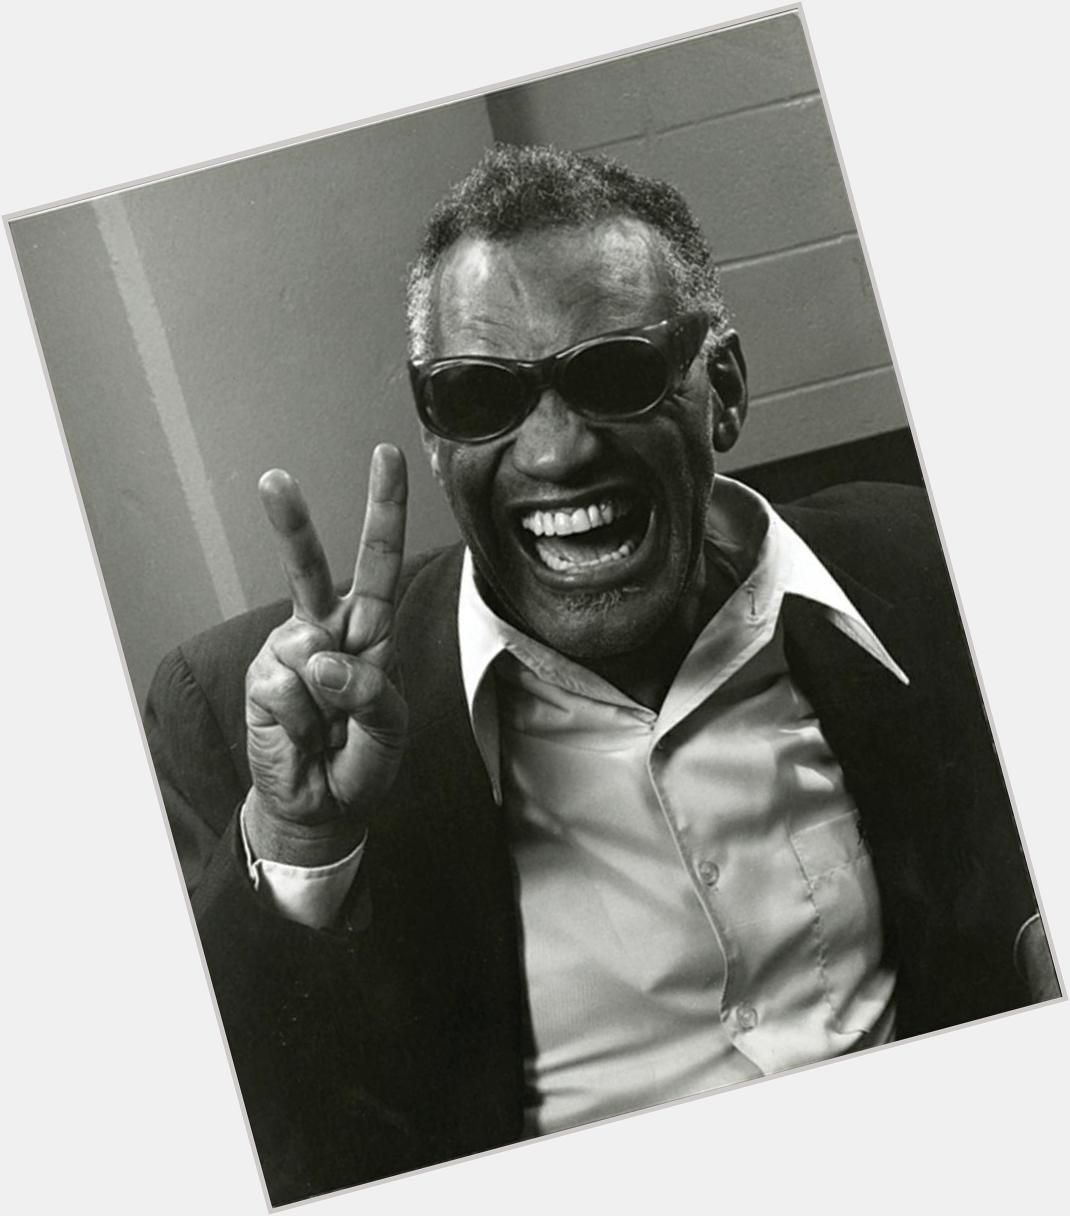 Happy birthday Ray Charles - would be 85 today but passed away in 2004 at age 73.   